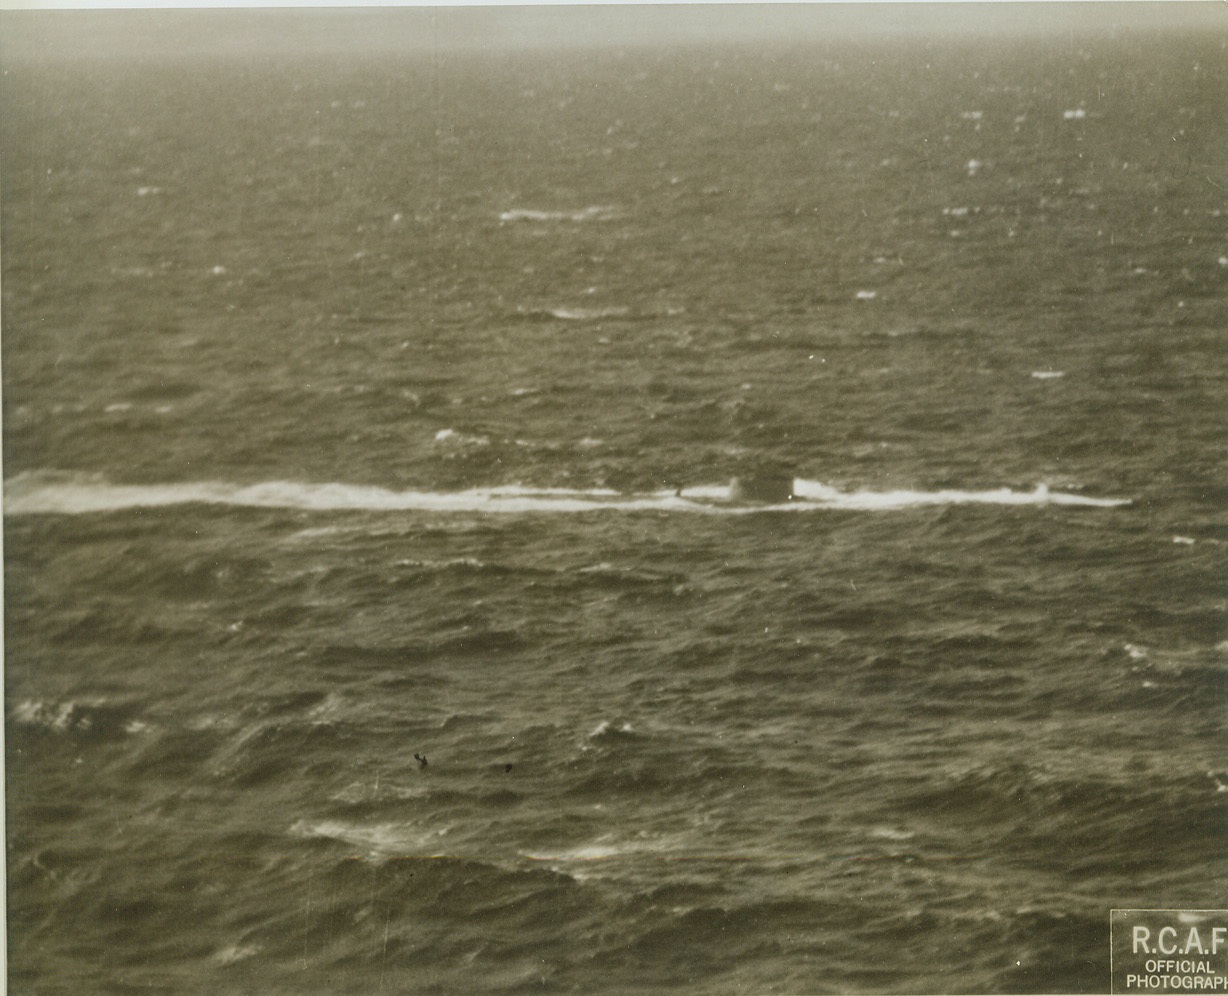 U-Boat Ducks, 1/7/1943. SOMEWHERE IN THE ATLANTIC -- The conning tower and a section of the afterdeck of a Nazi sub can be seen as the U-boat ducks to avoid an attack by an RCAF Atlantic coastal patrol bomber. A few moments later, bullets rattled on its hull and depth charges from the plane churned the water all around it.  Credit: (ACME);